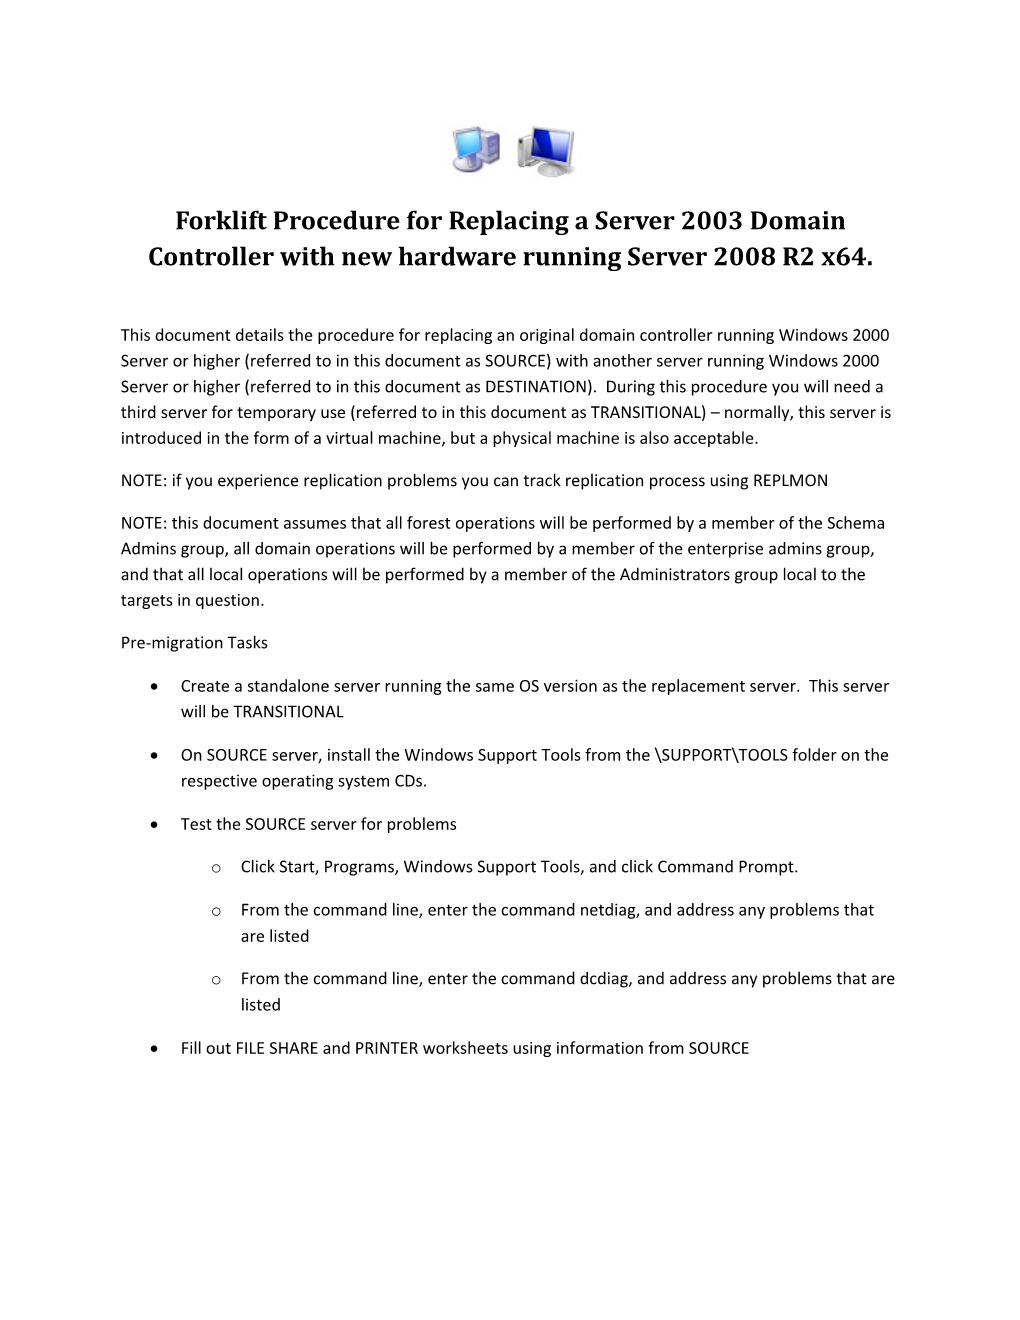 Forklift Procedure for Replacing a Server 2003 Domain Controller with New Hardware Running